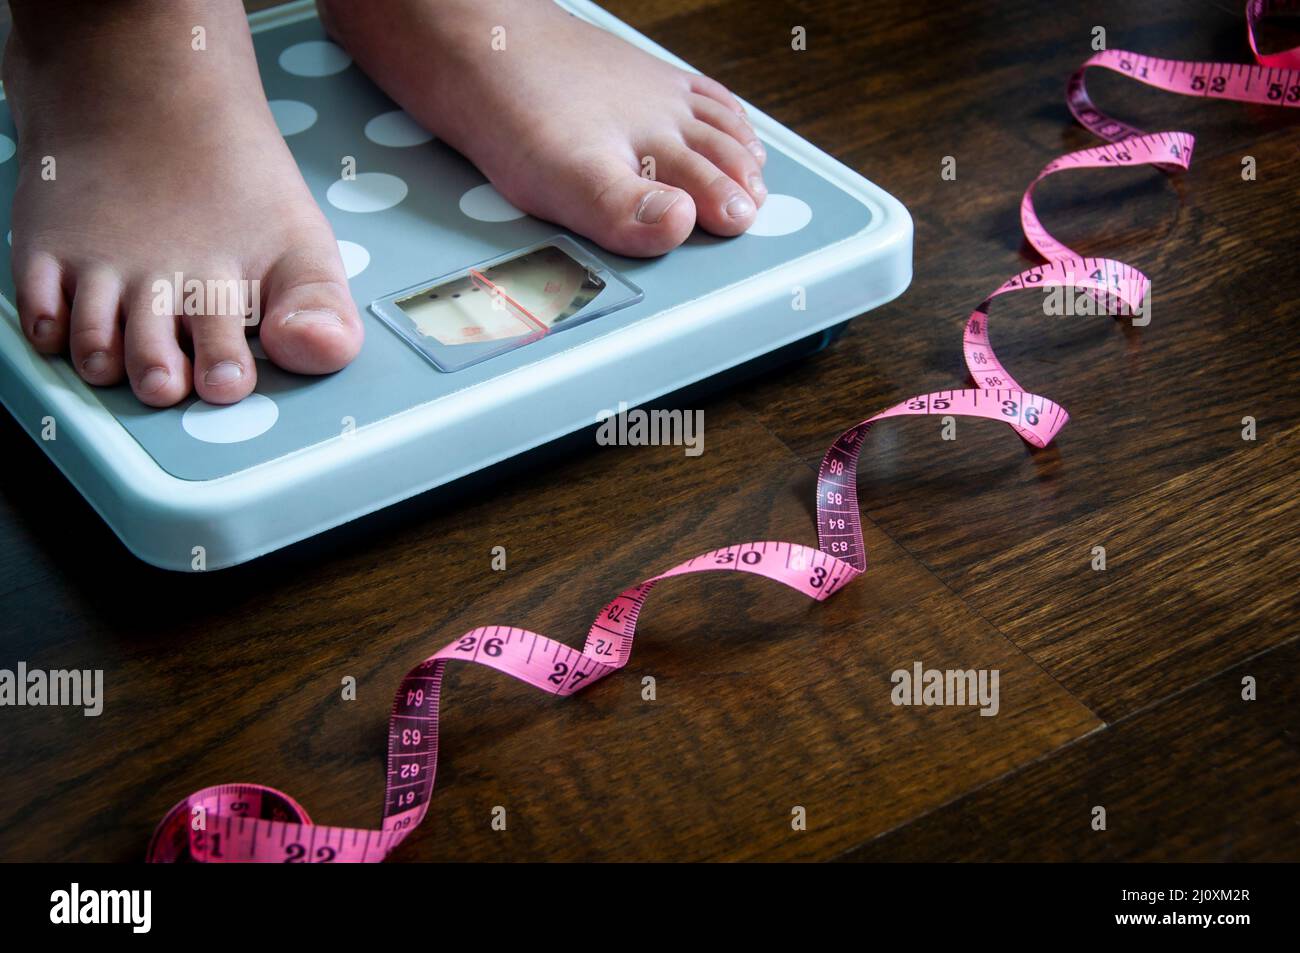 Side view of measuring tape and feet on weight scale . Weight loss and fitness concept. Stock Photo